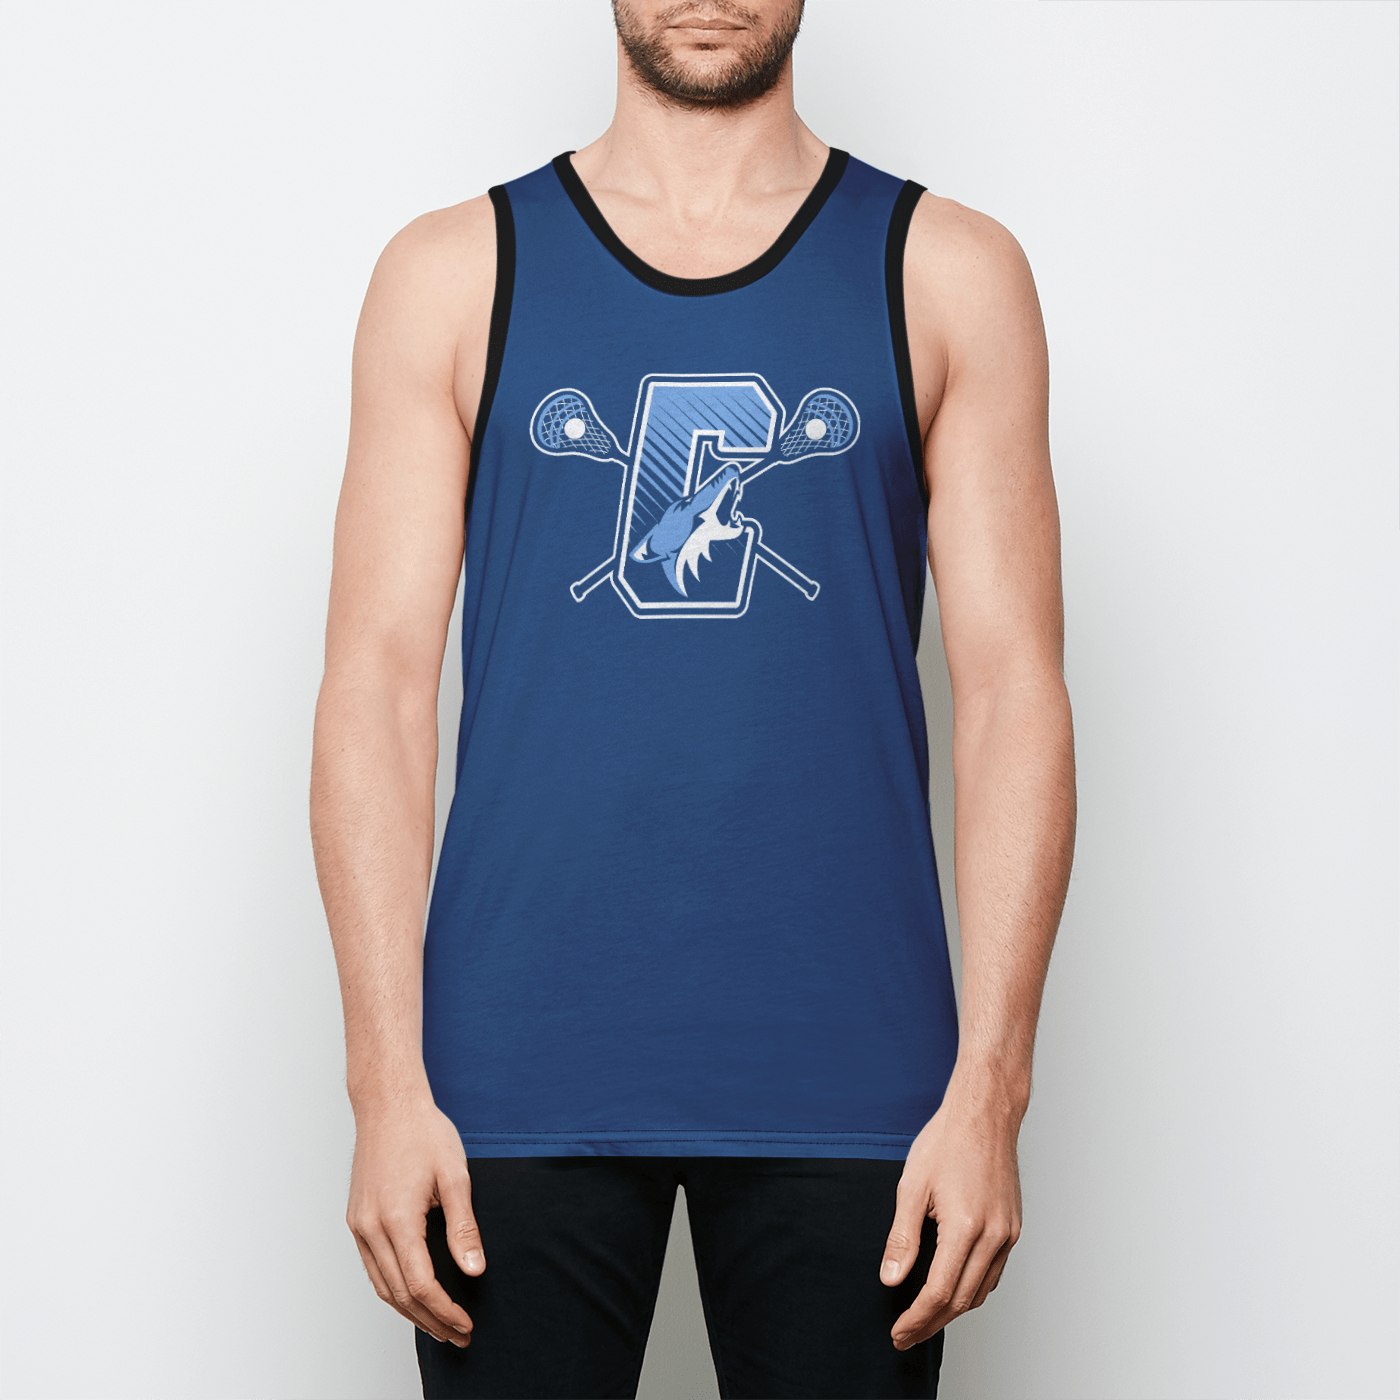 Coyotes Youth Lacrosse Adult Men's Tank Top Signature Lacrosse